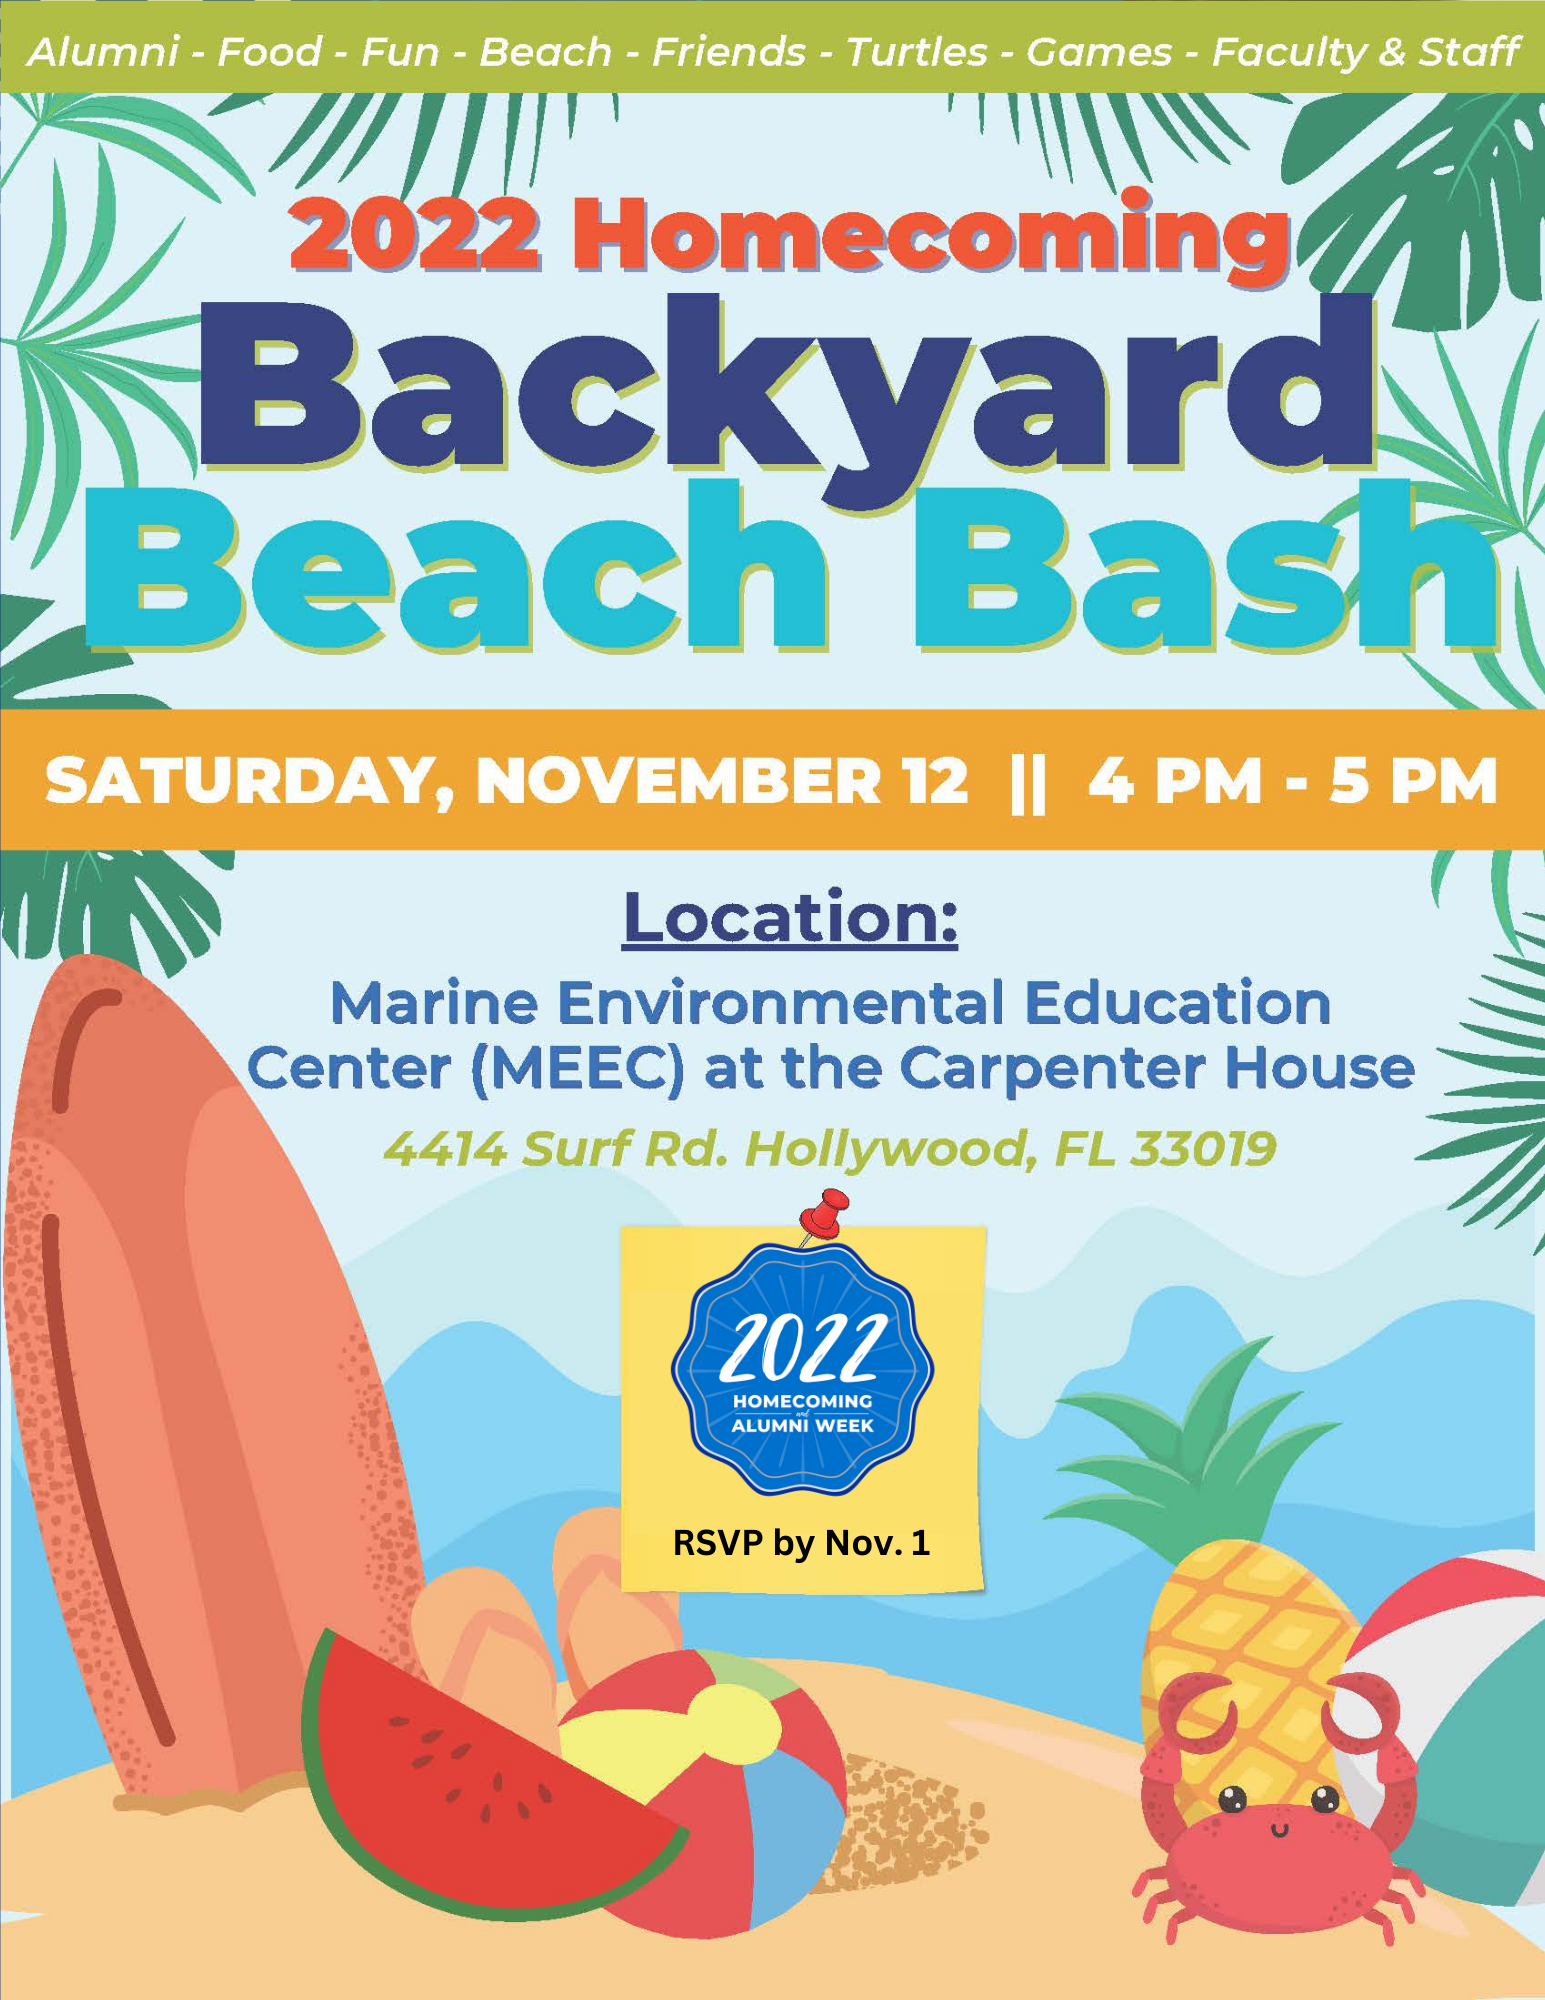 2022 Backyard Beach Bash flyer inviting people to attend